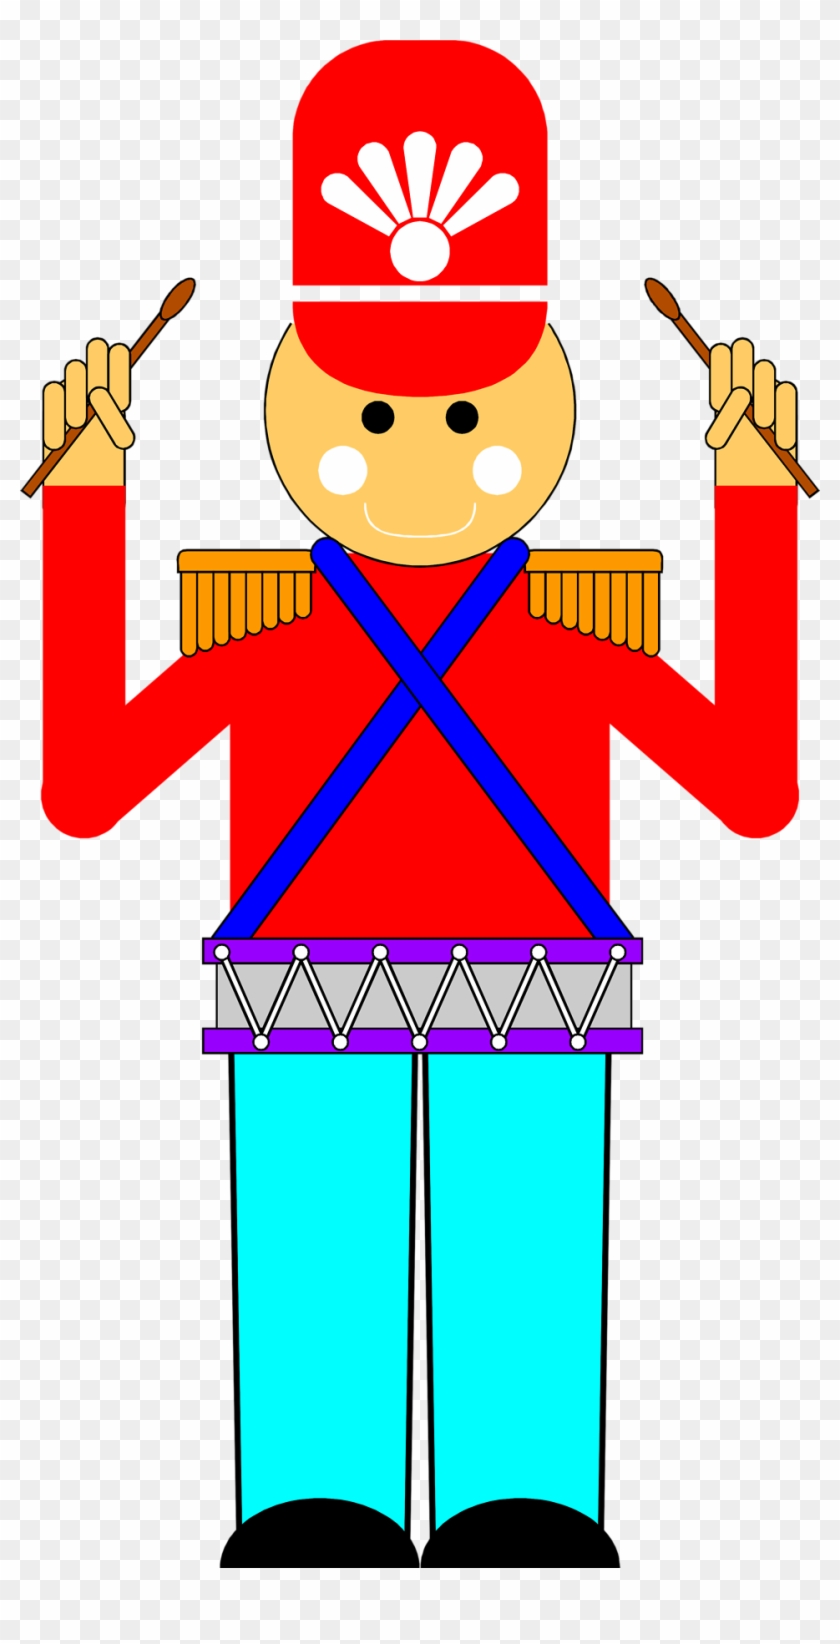 Illustration Of A Toy Soldier With A Drum - Wooden Soldier Clip Art #1130498